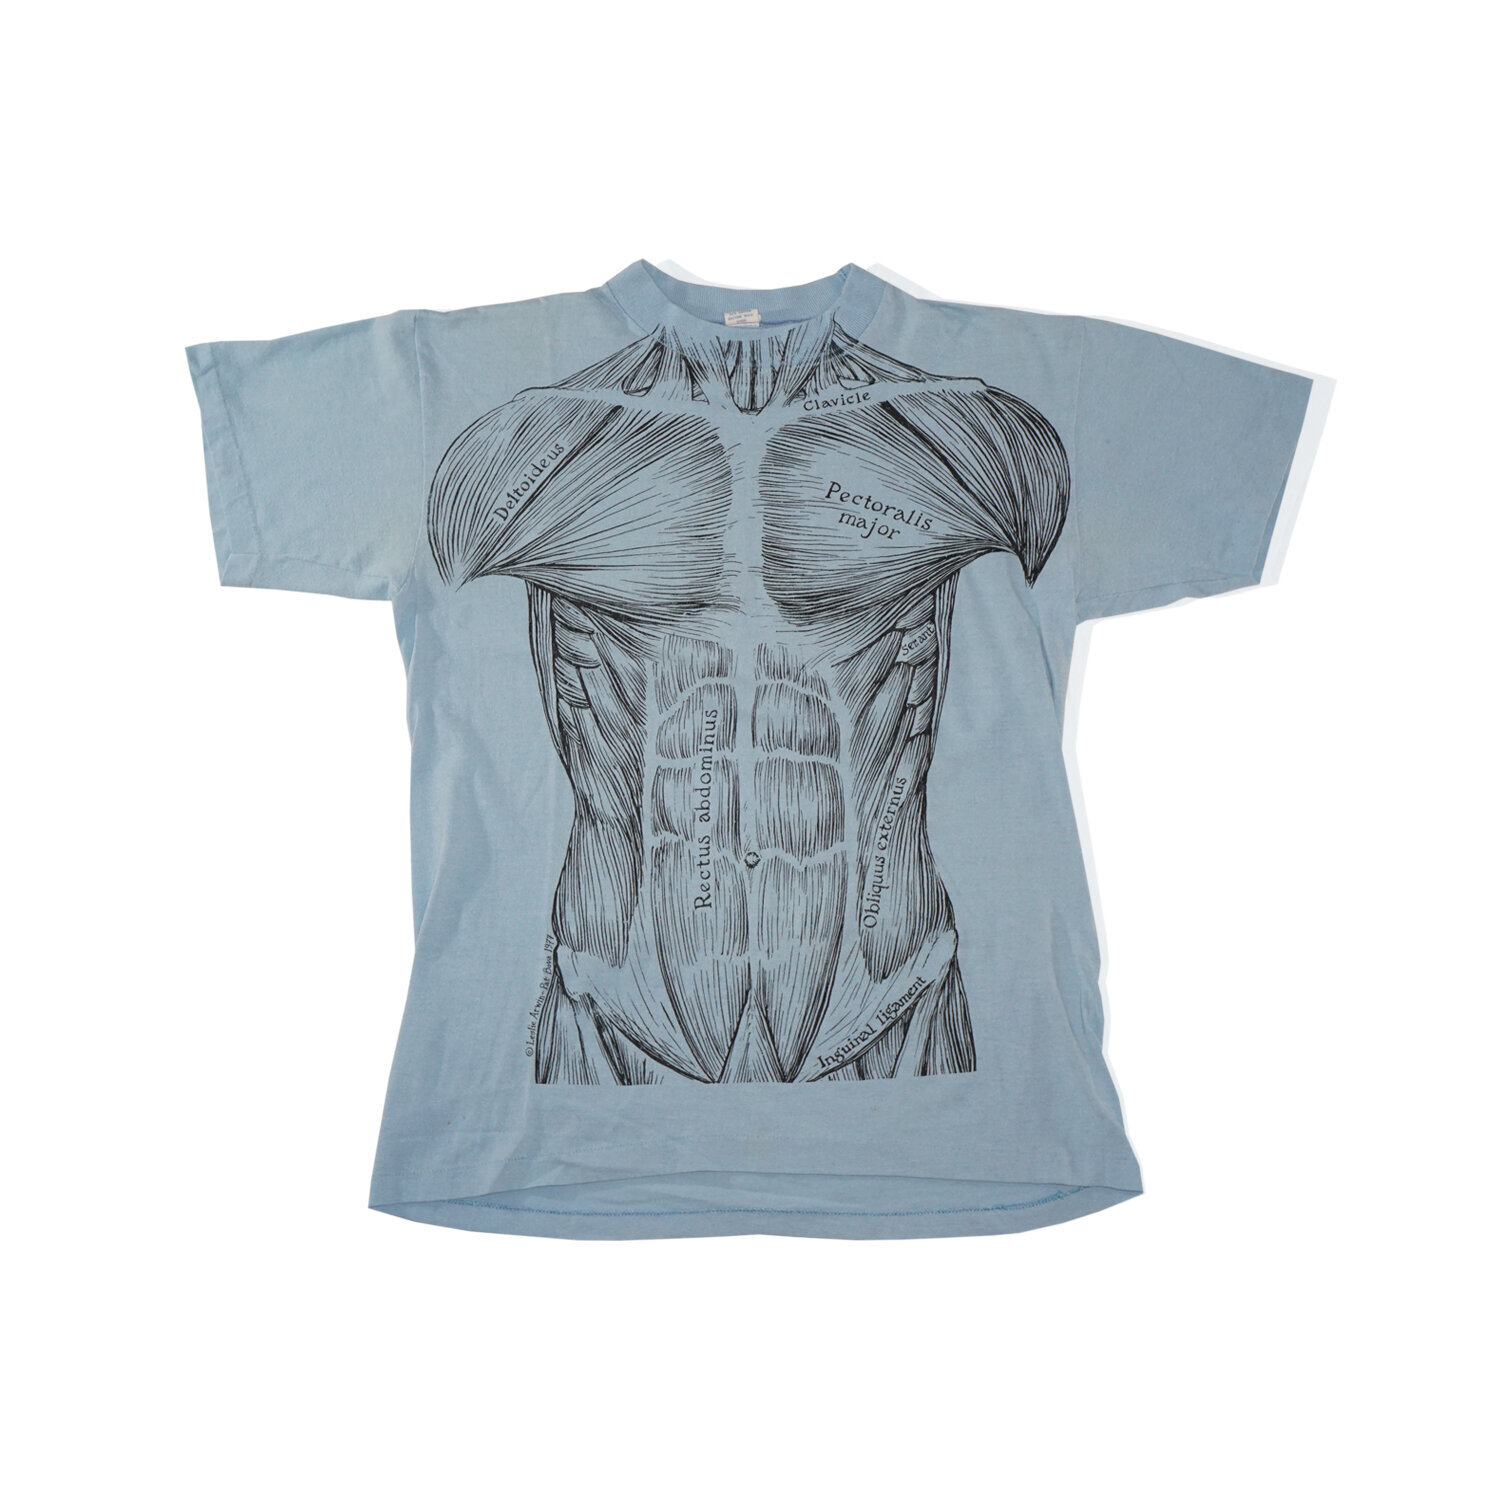 1977 Muscle Anatomy Vintage T-Shirt